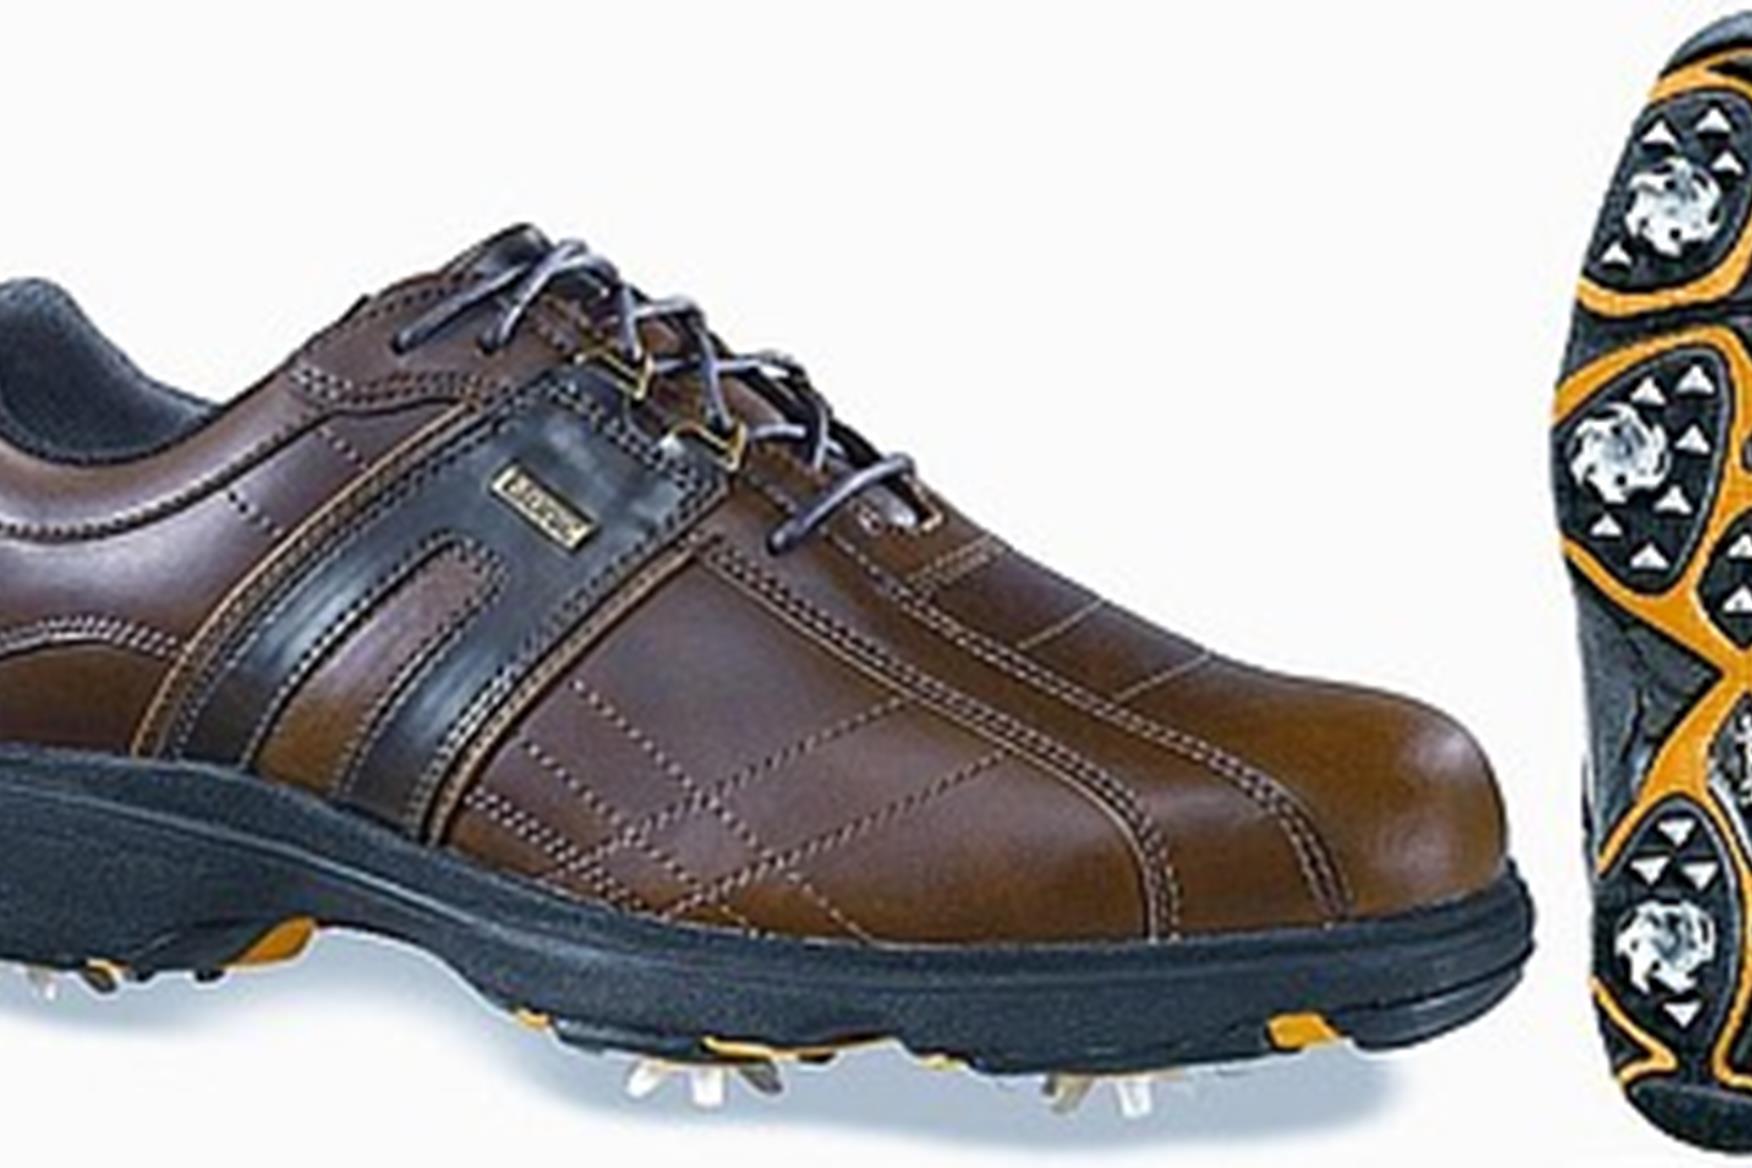 Etonic Golf Shoes Reviews | Today's Golfer